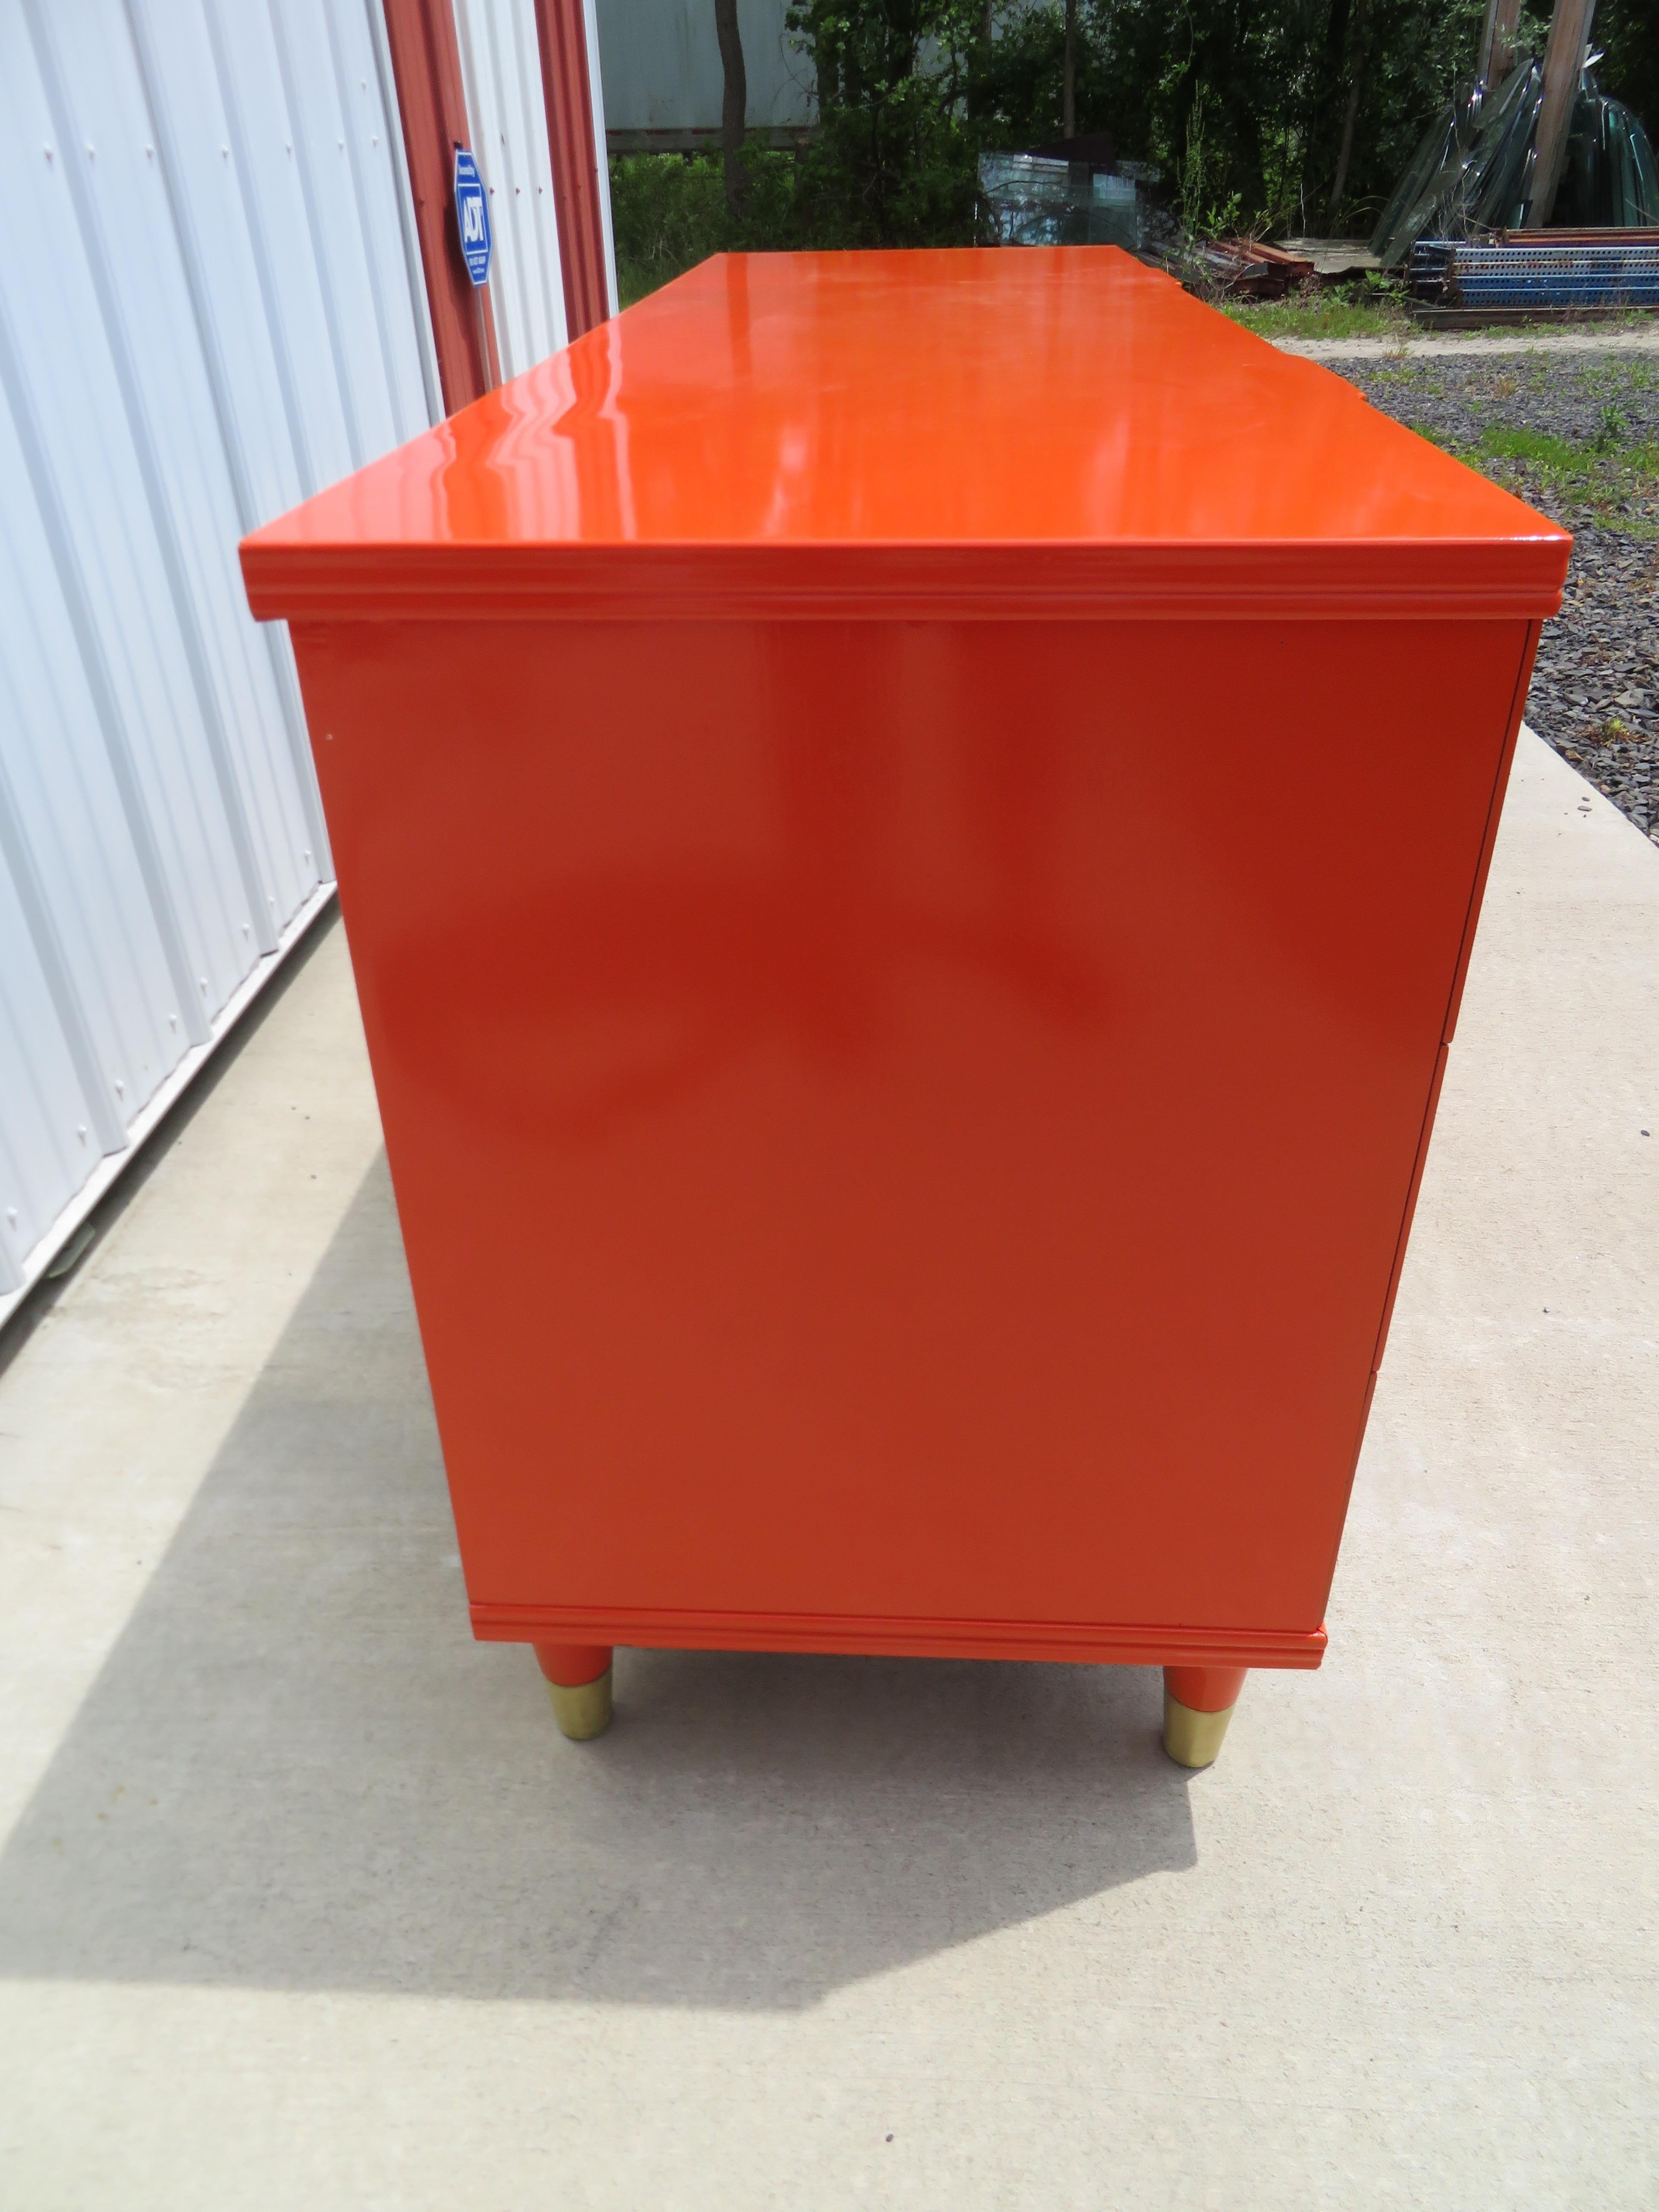 Lacquered Magnificent Hermes Orange Widdicomb Credenza Asian Brass Mid-Century Modern For Sale